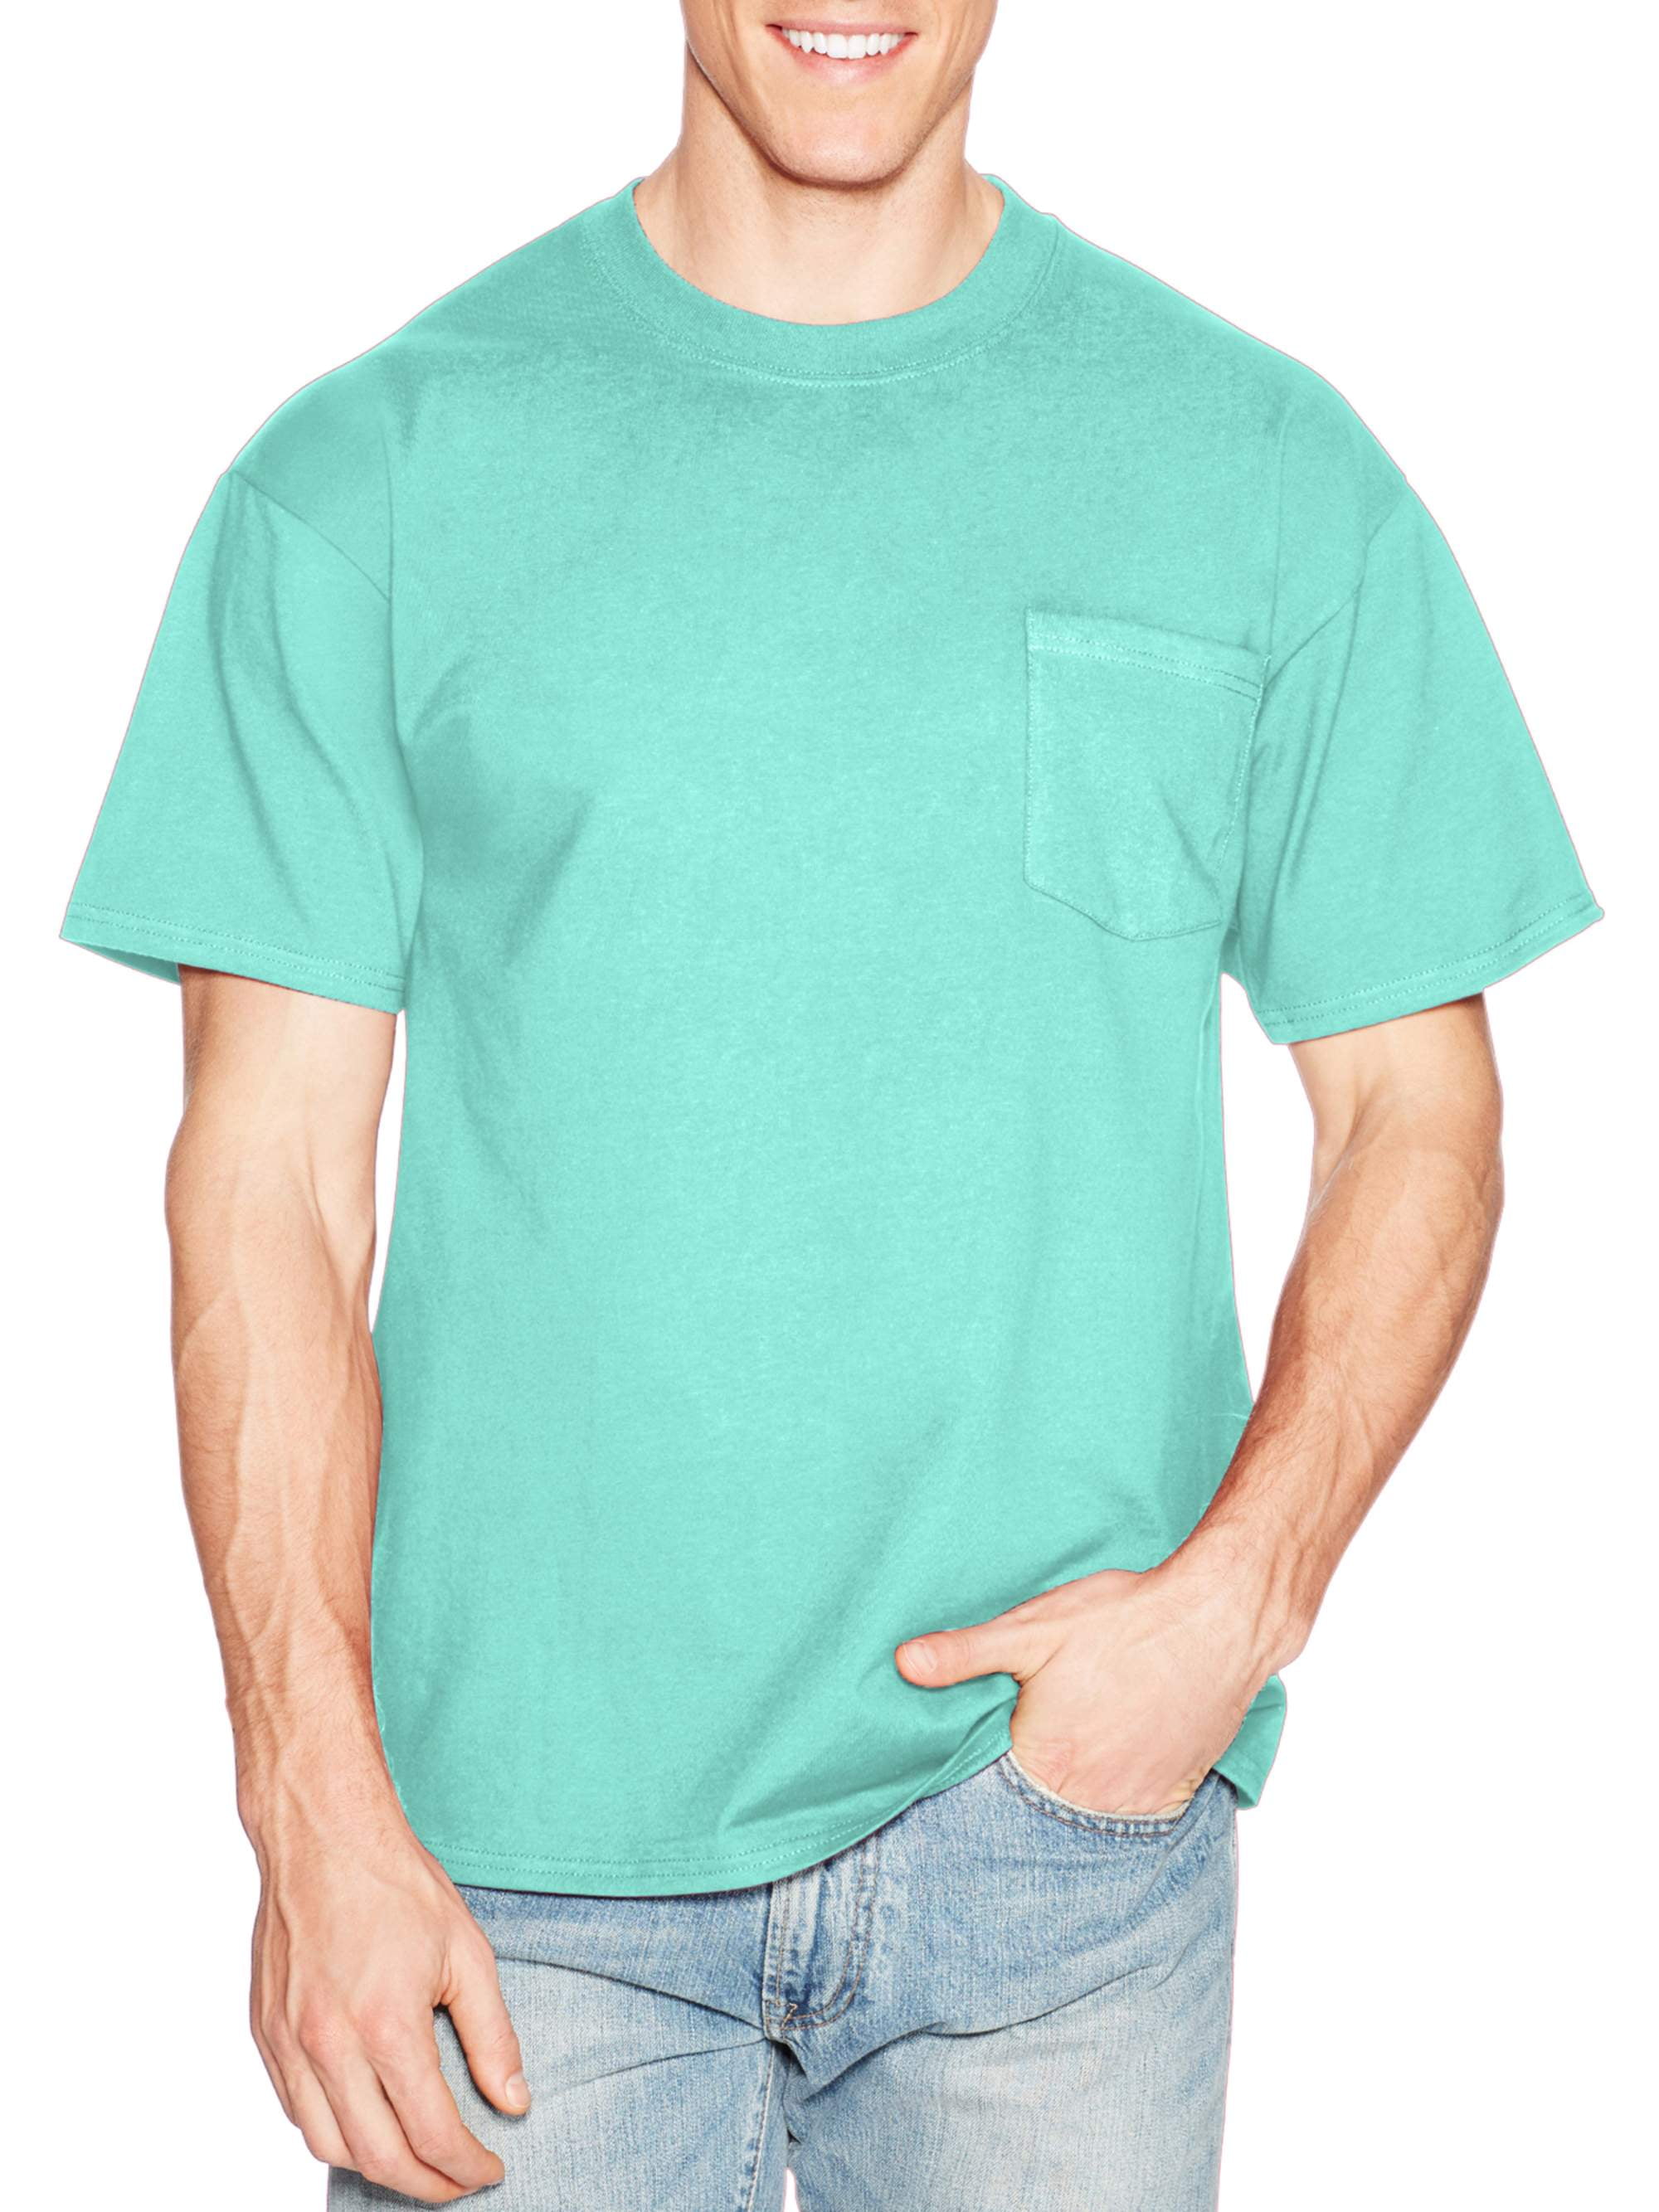 Hanes Men's Premium Beefy-T Short Sleeve T-Shirt With Pocket, Up to ...